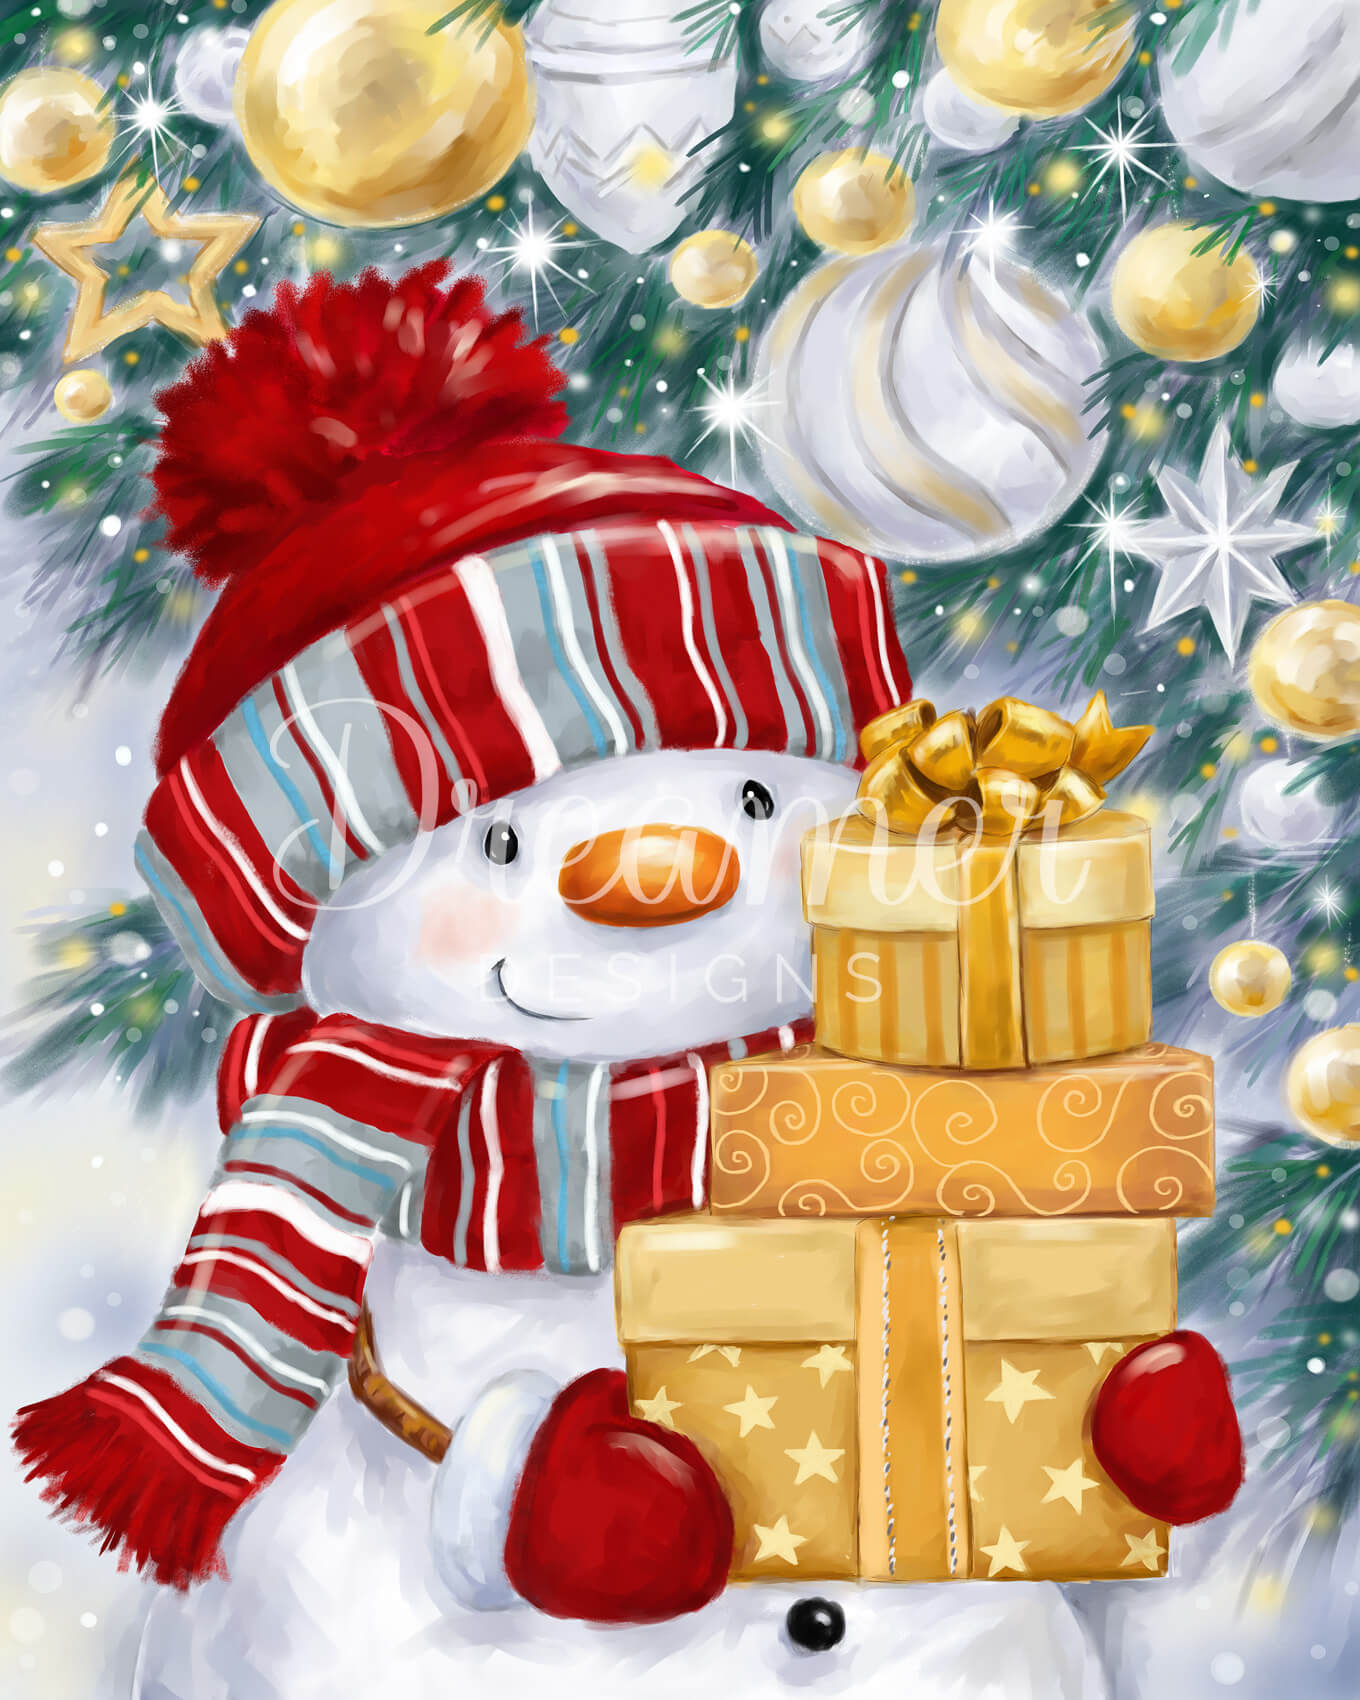 Snowman with Gold and Silver Presents